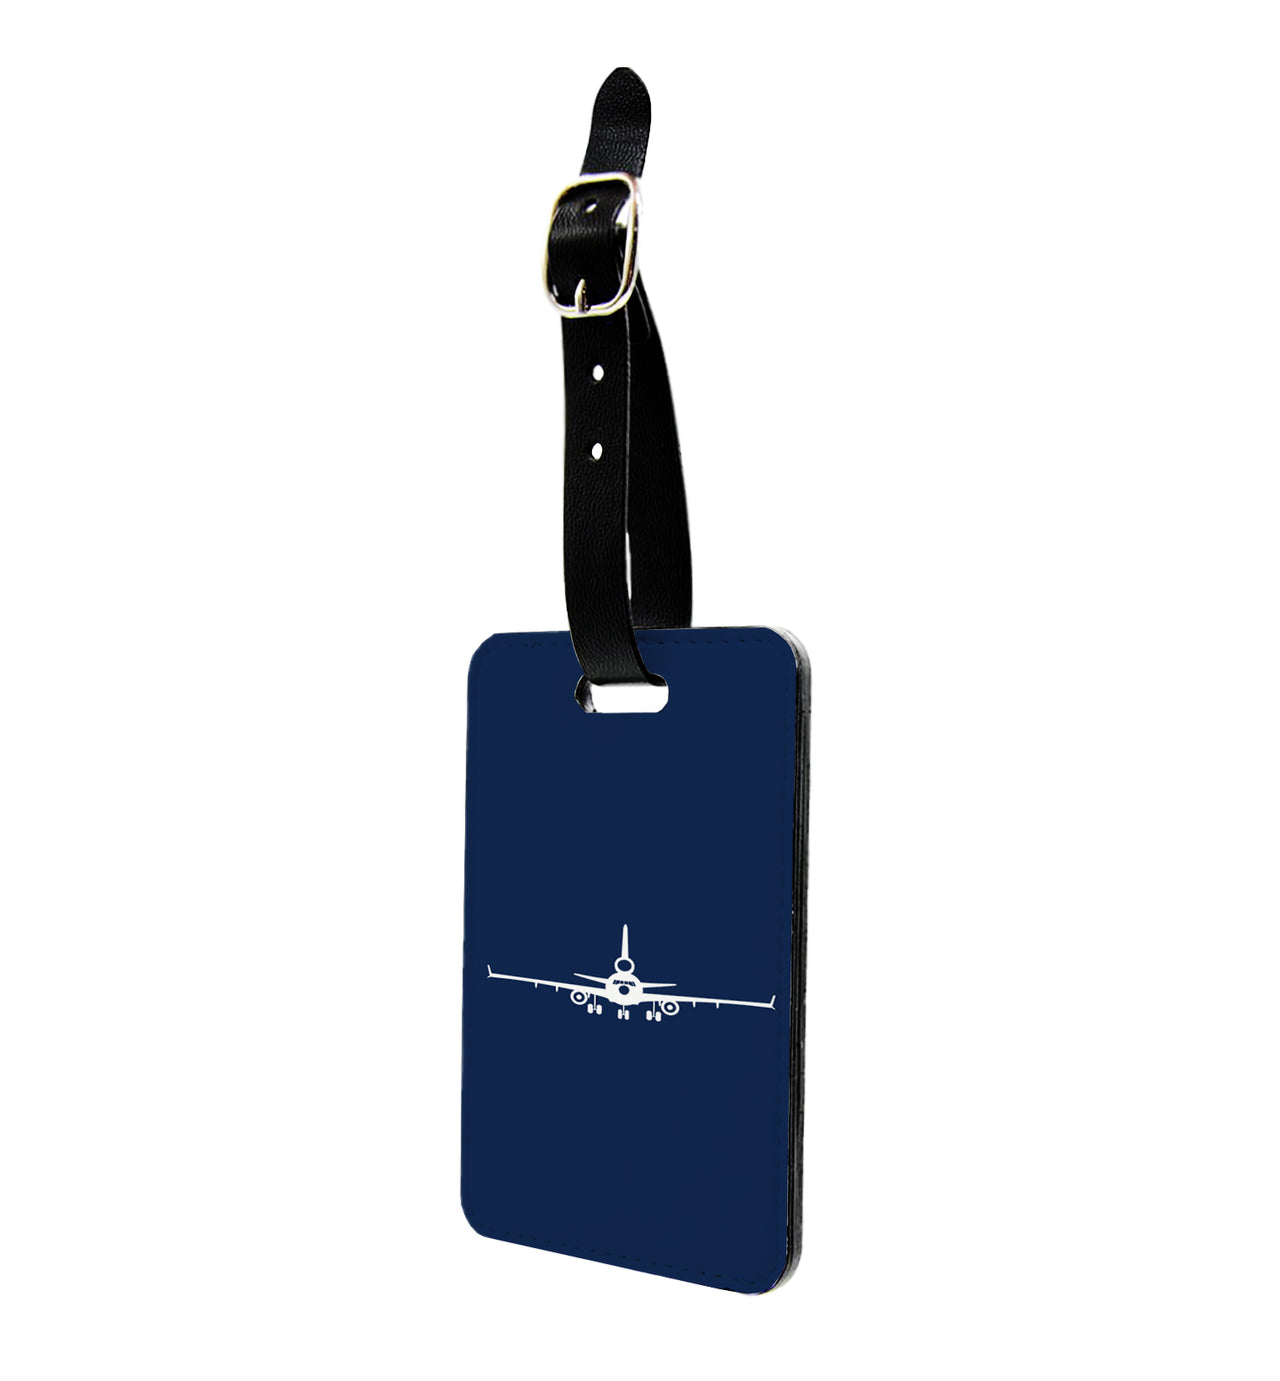 McDonnell Douglas MD-11 Silhouette Plane Designed Luggage Tag